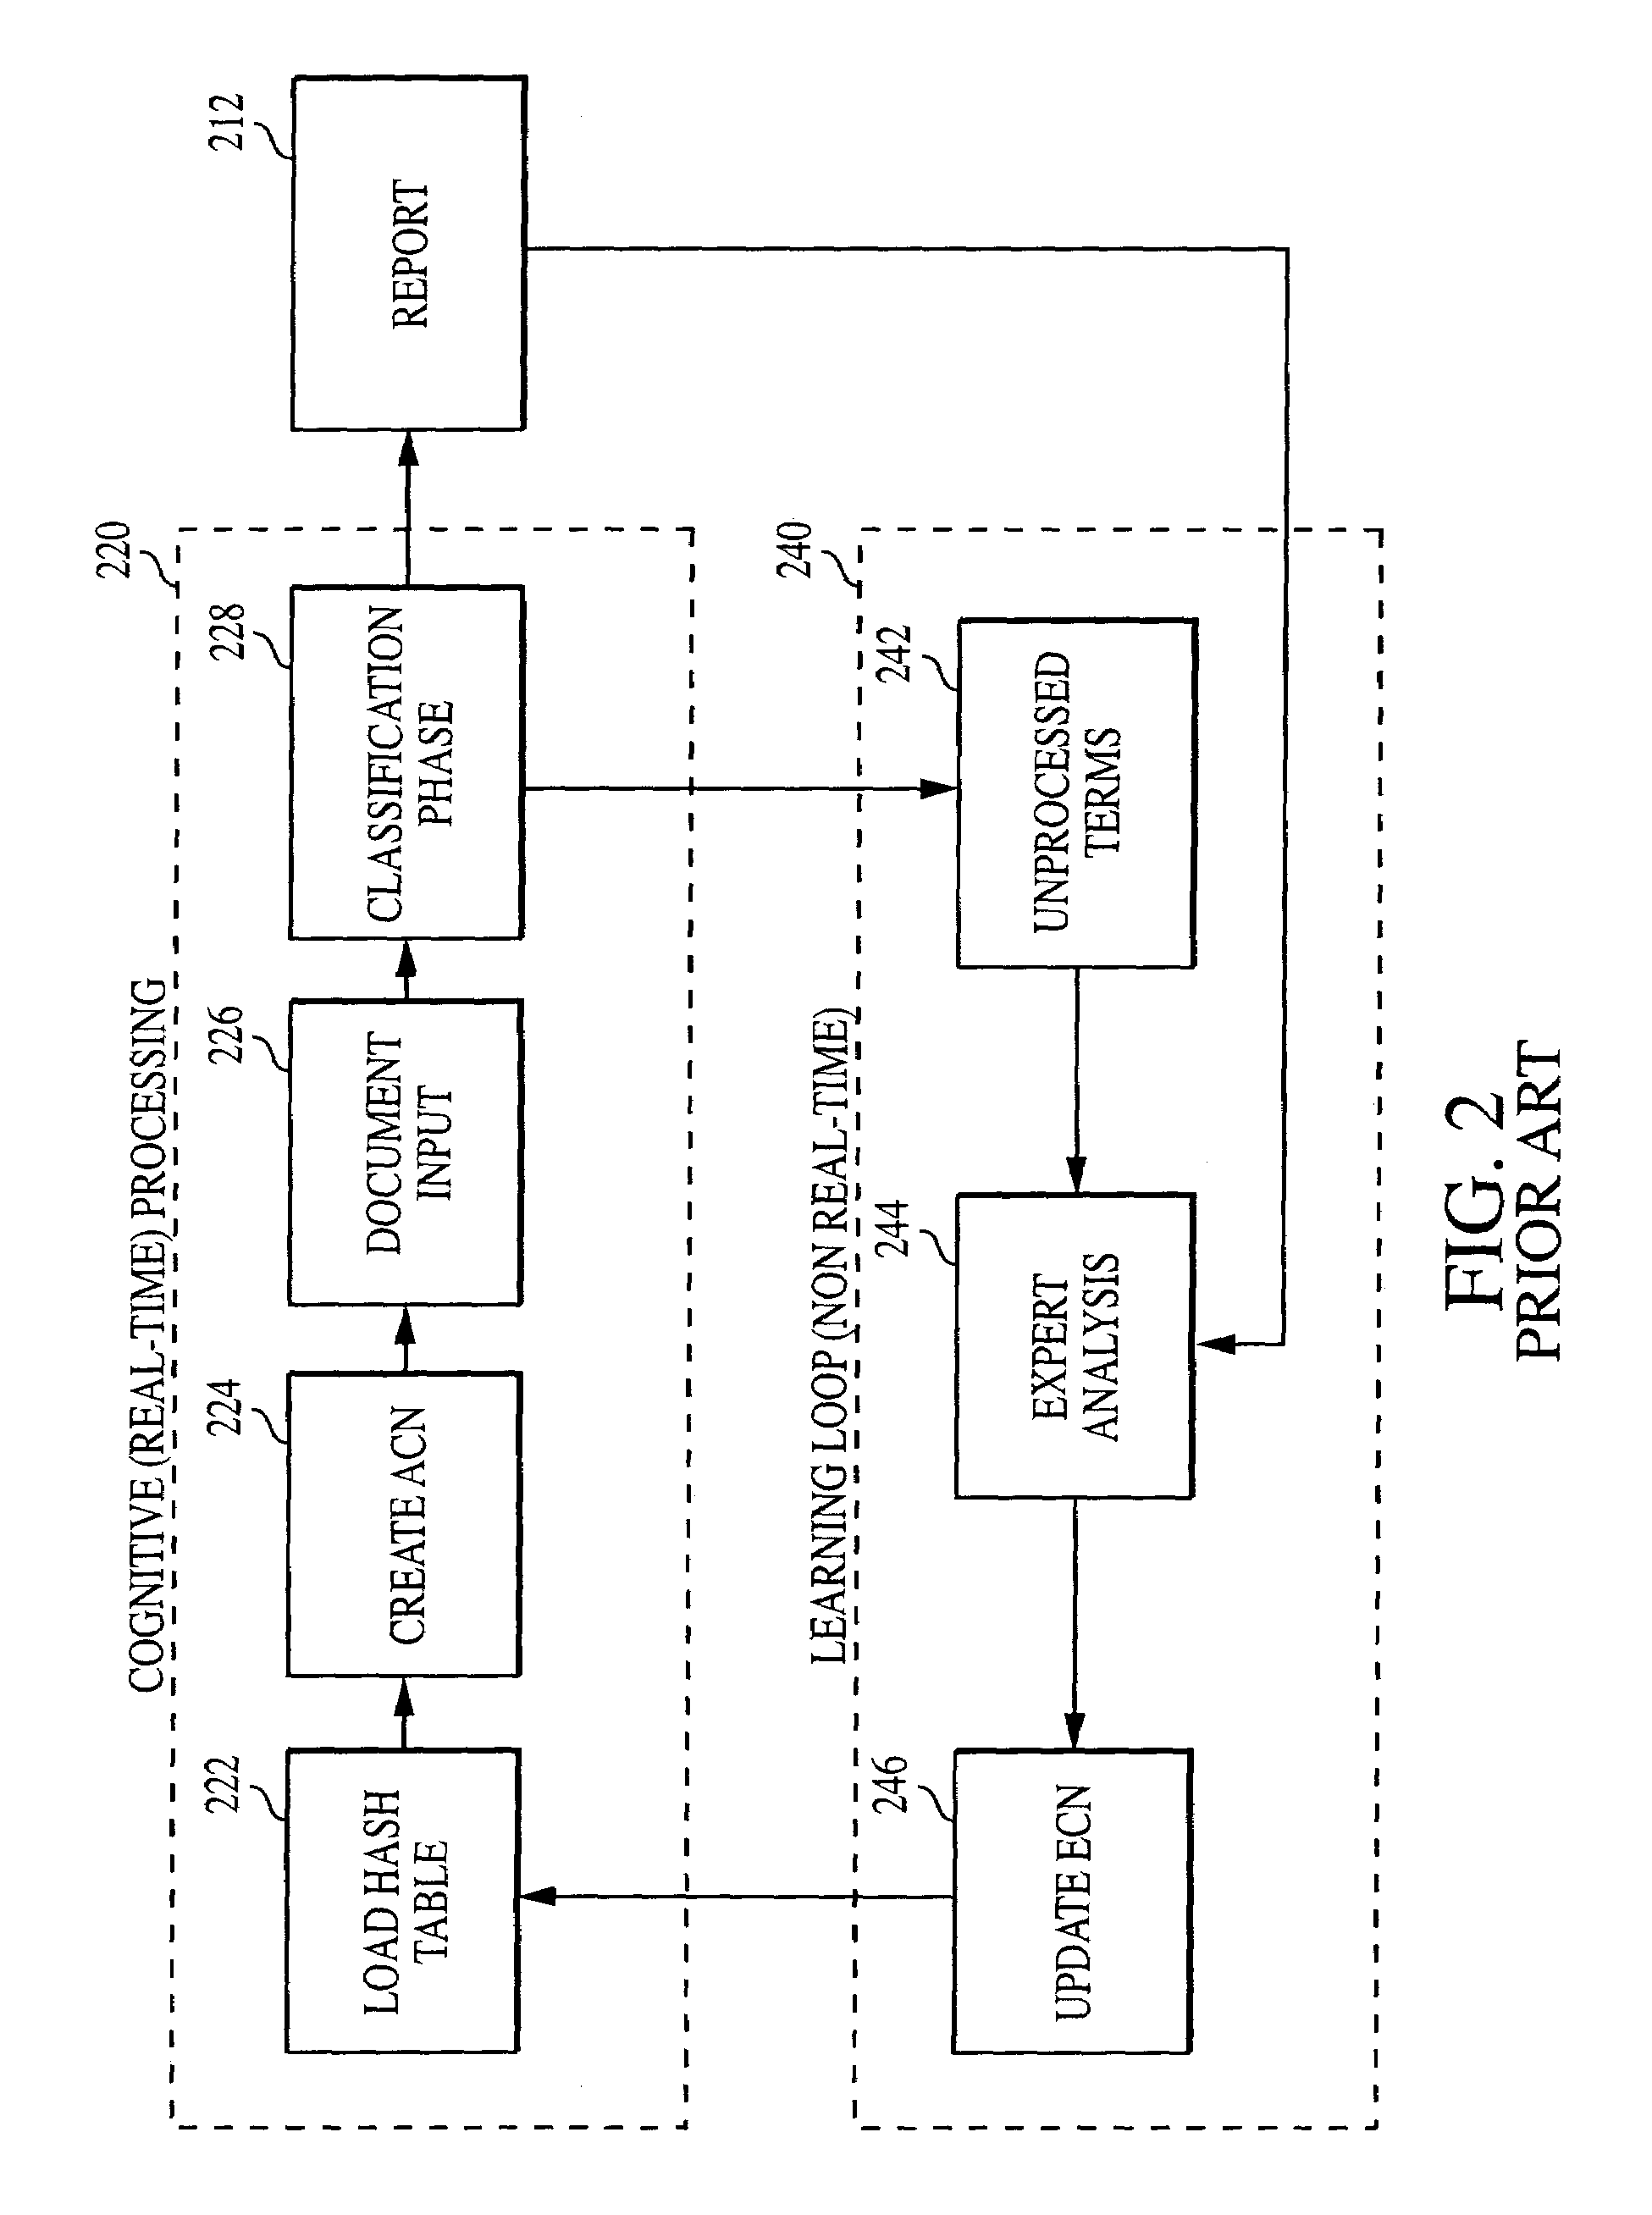 Computer assisted and/or implemented method for group collarboration on projects incorporating electronic information